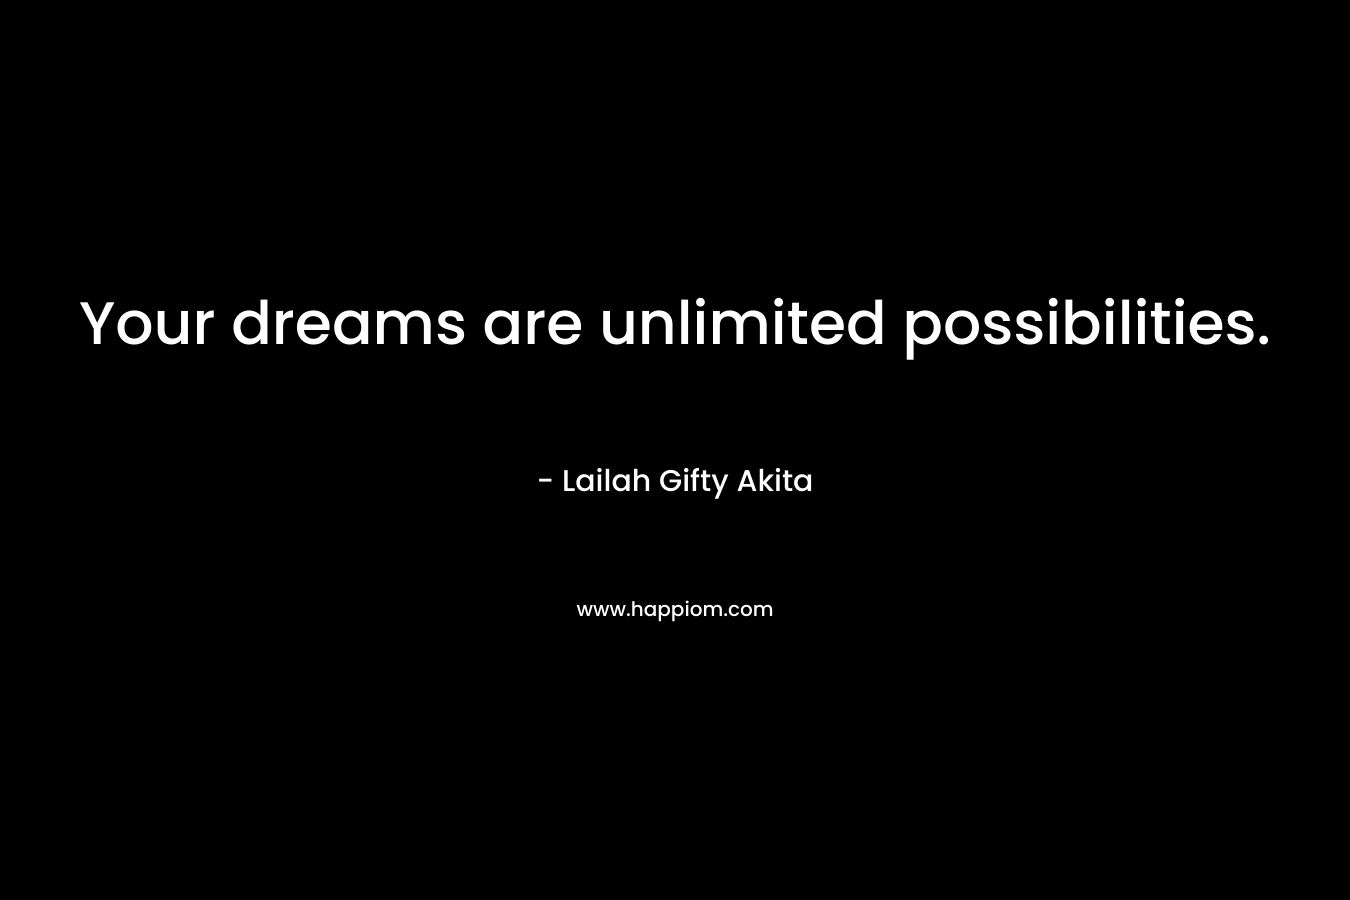 Your dreams are unlimited possibilities. – Lailah Gifty Akita